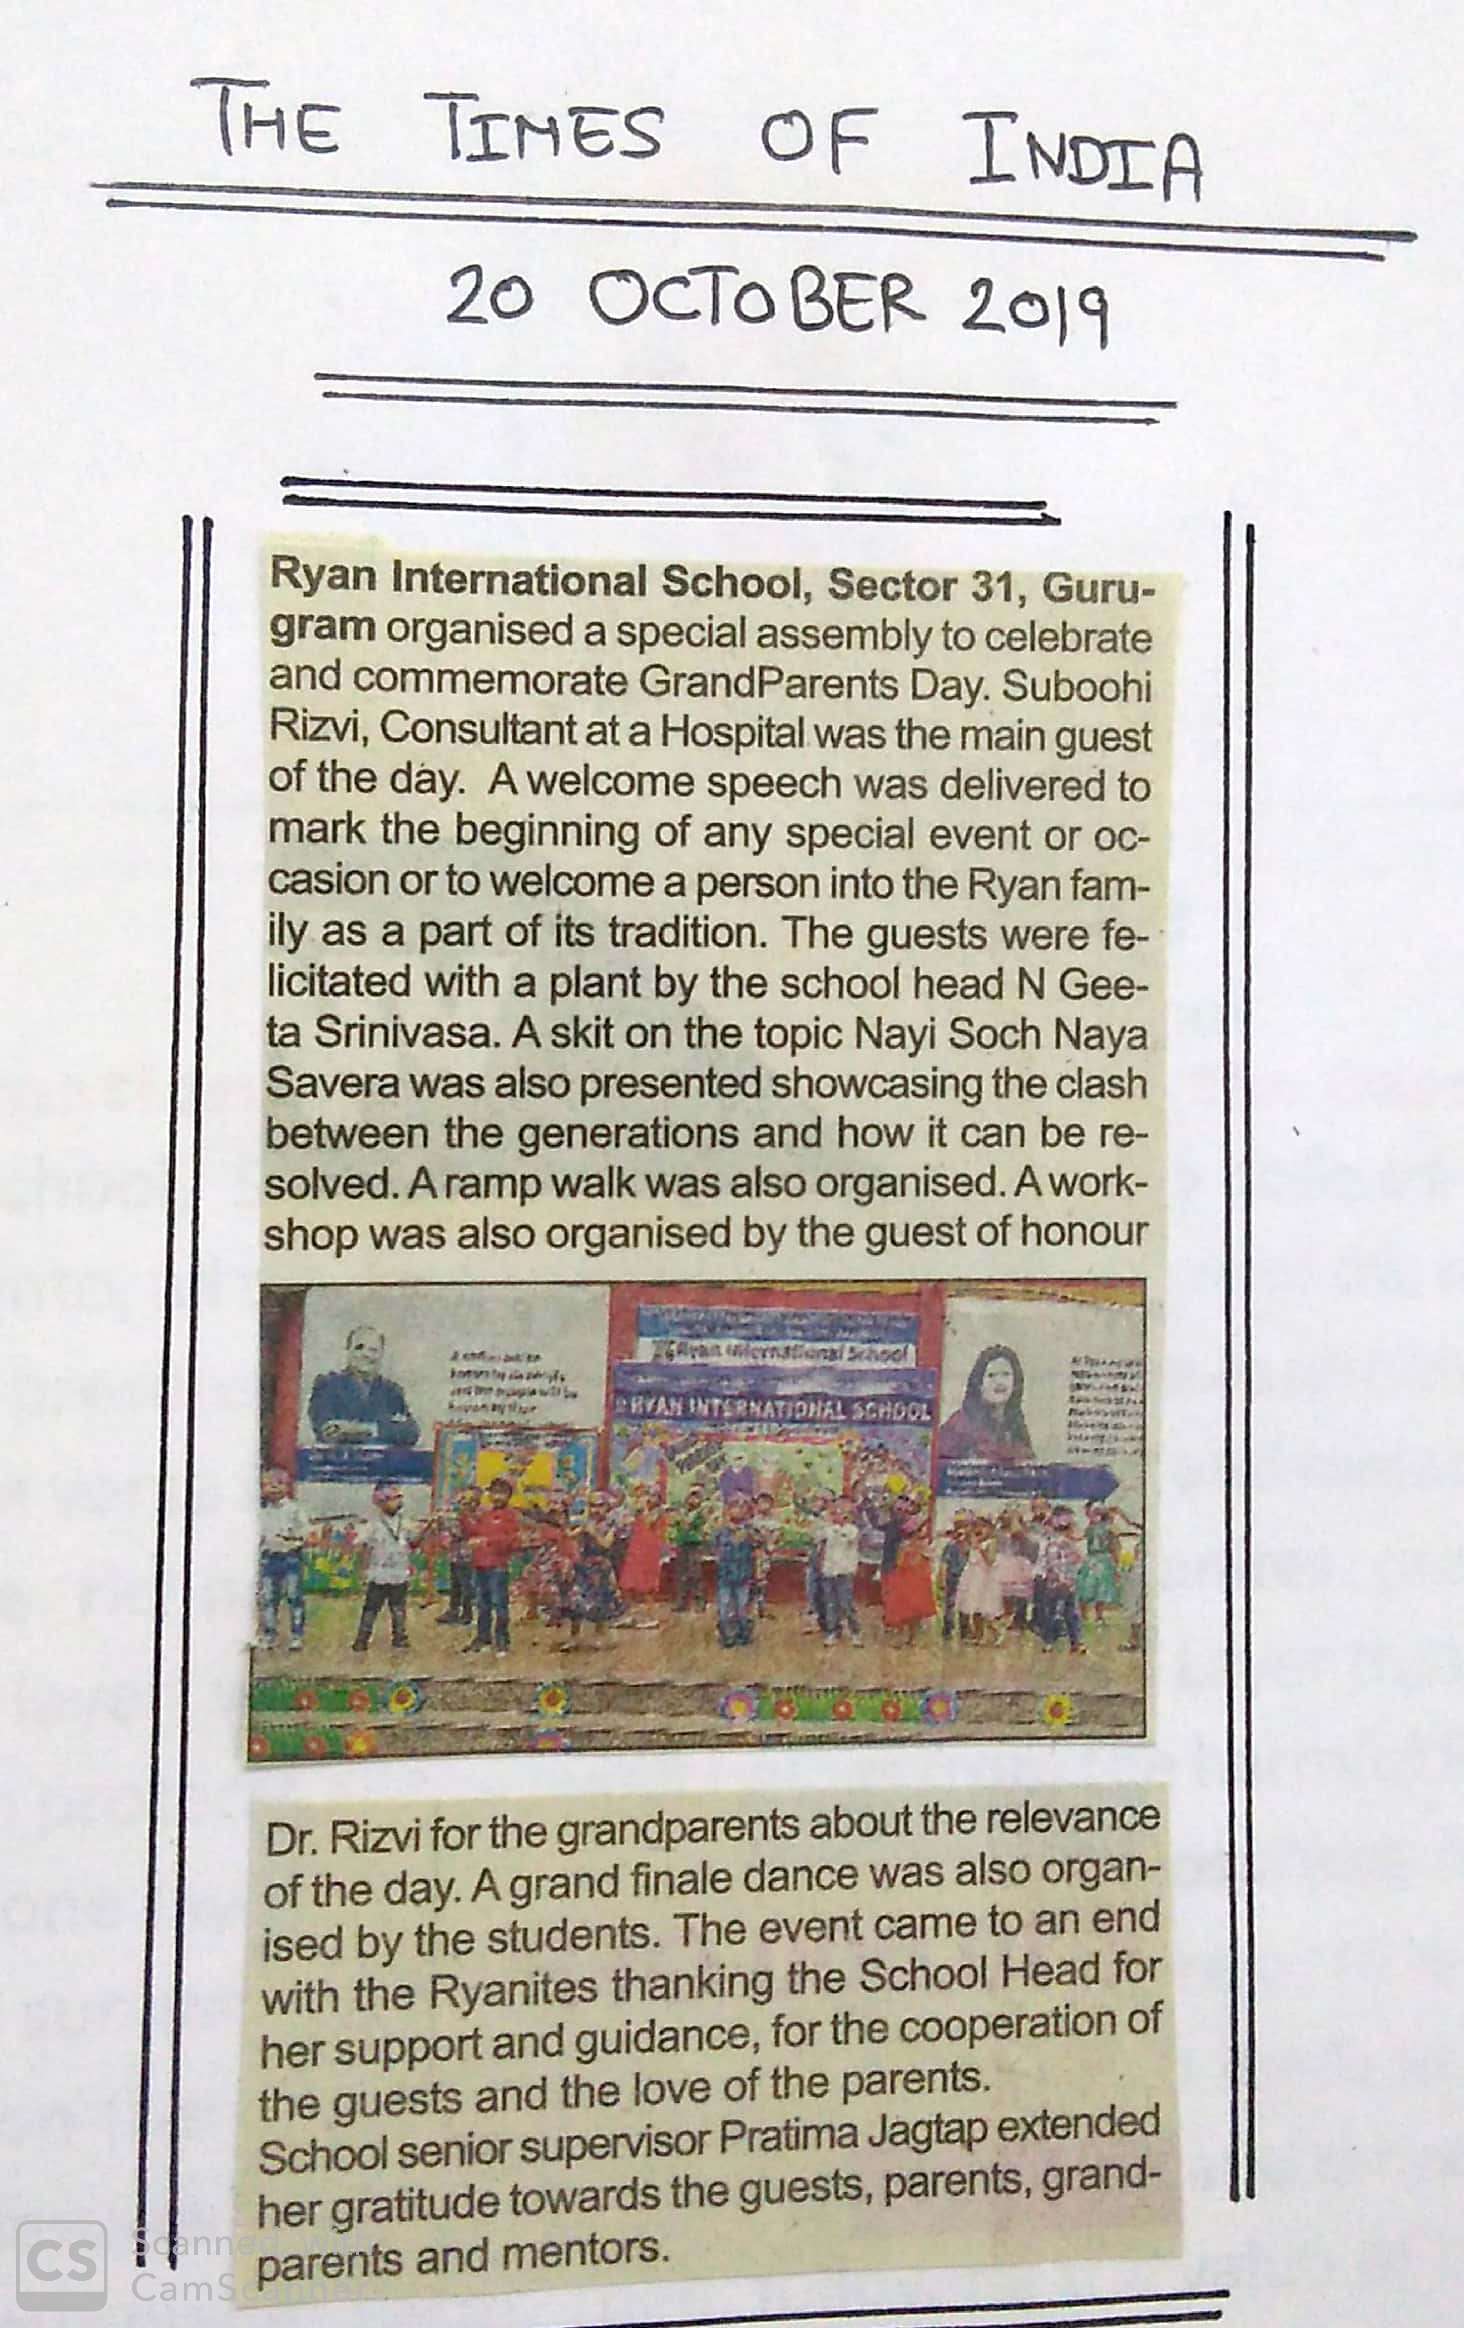 Organised a special assembly to celebrate Grandparents’ Day - Ryan International School, Sec 31 Gurgaon